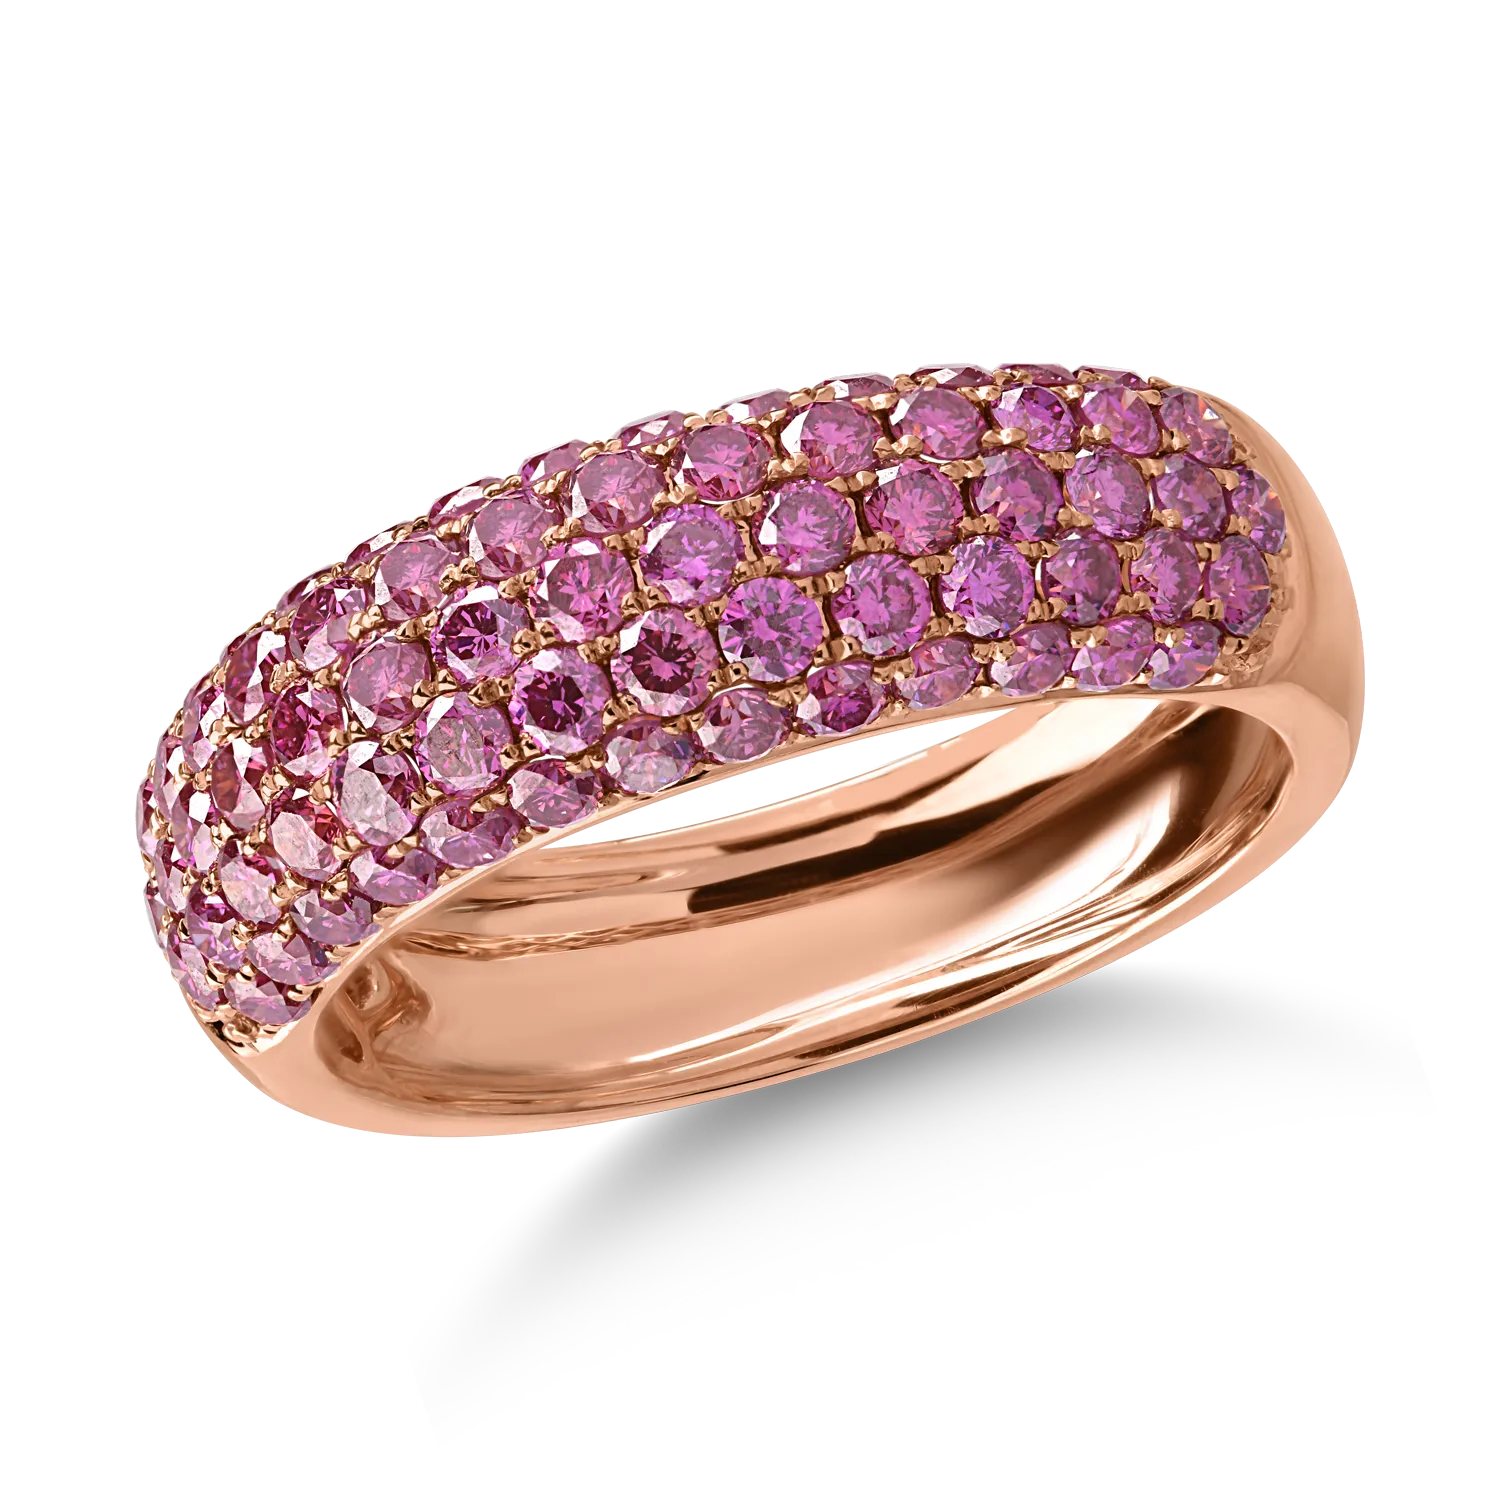 Rose gold ring with 1.48ct pink sapphires